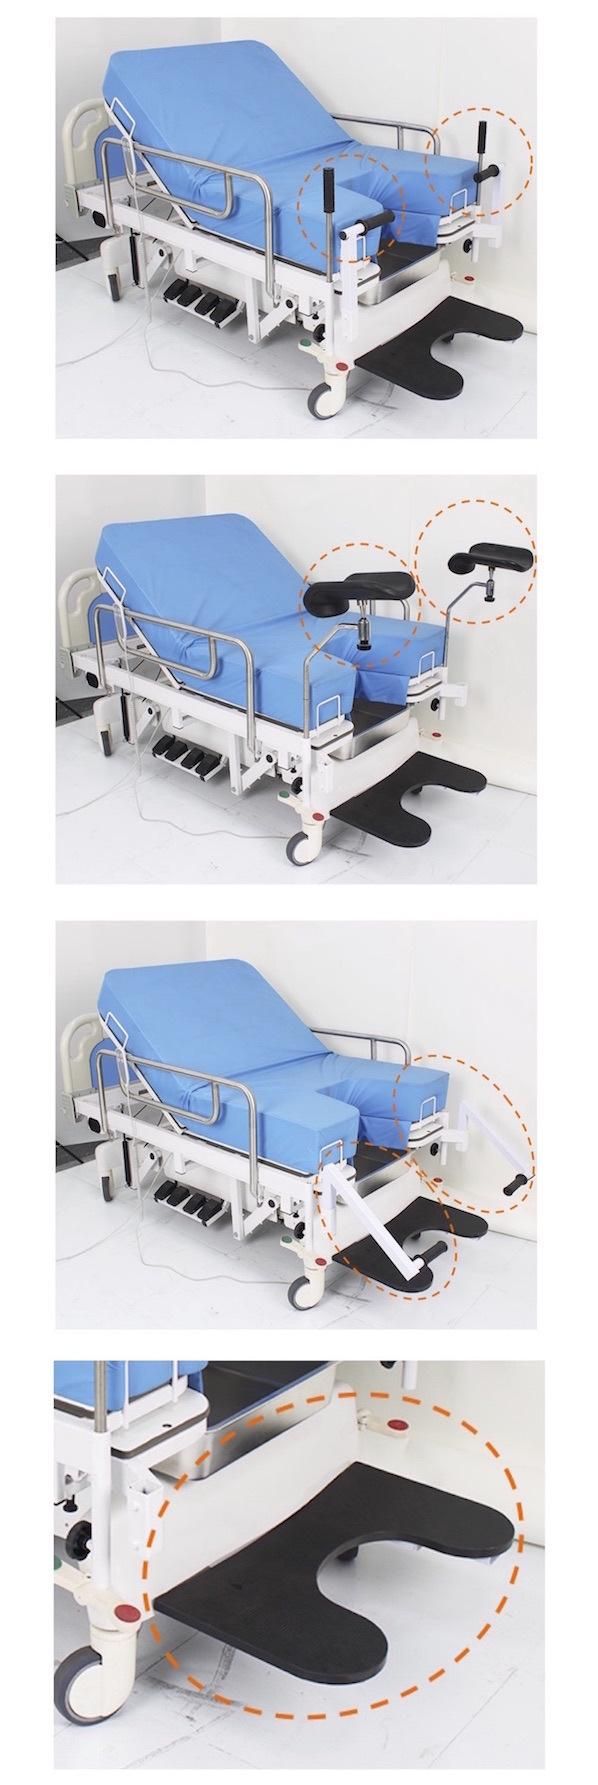 HS5248 Ordinary Parturition Operating Birthing Use Delivery Bed Table with Competitive Price